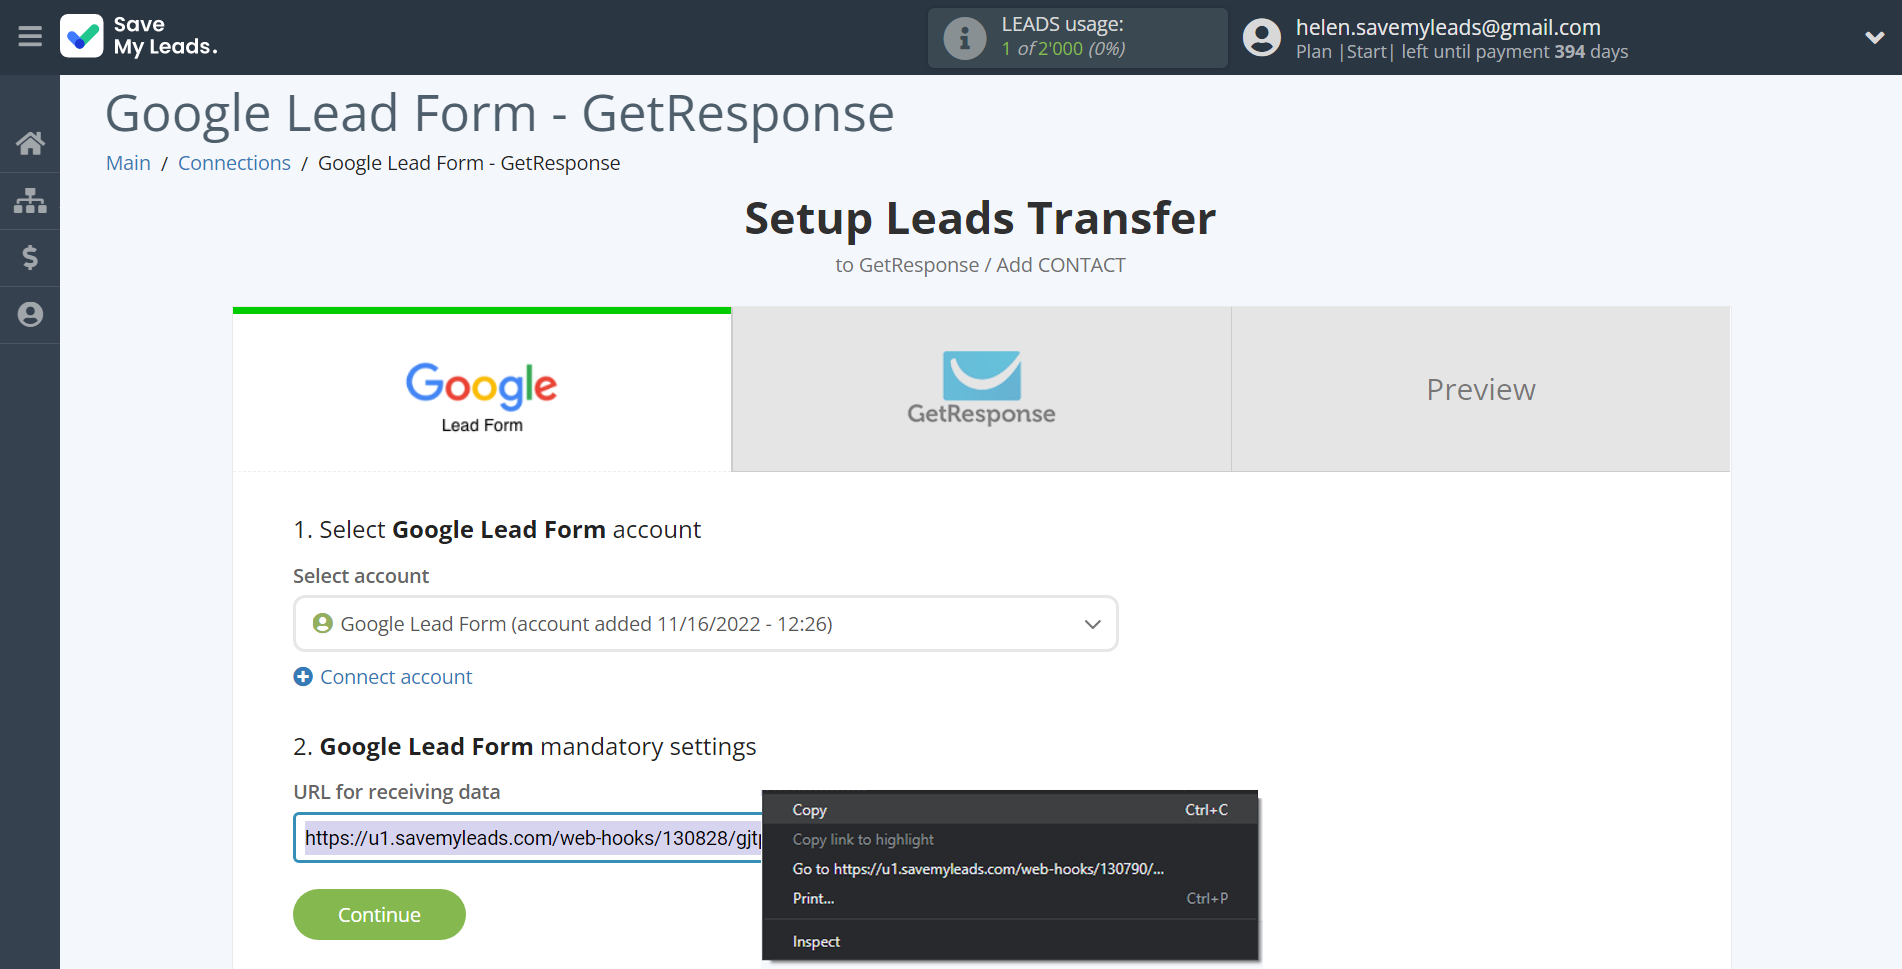 How to Connect Google Lead Form with GetResponse | Data Source account connection